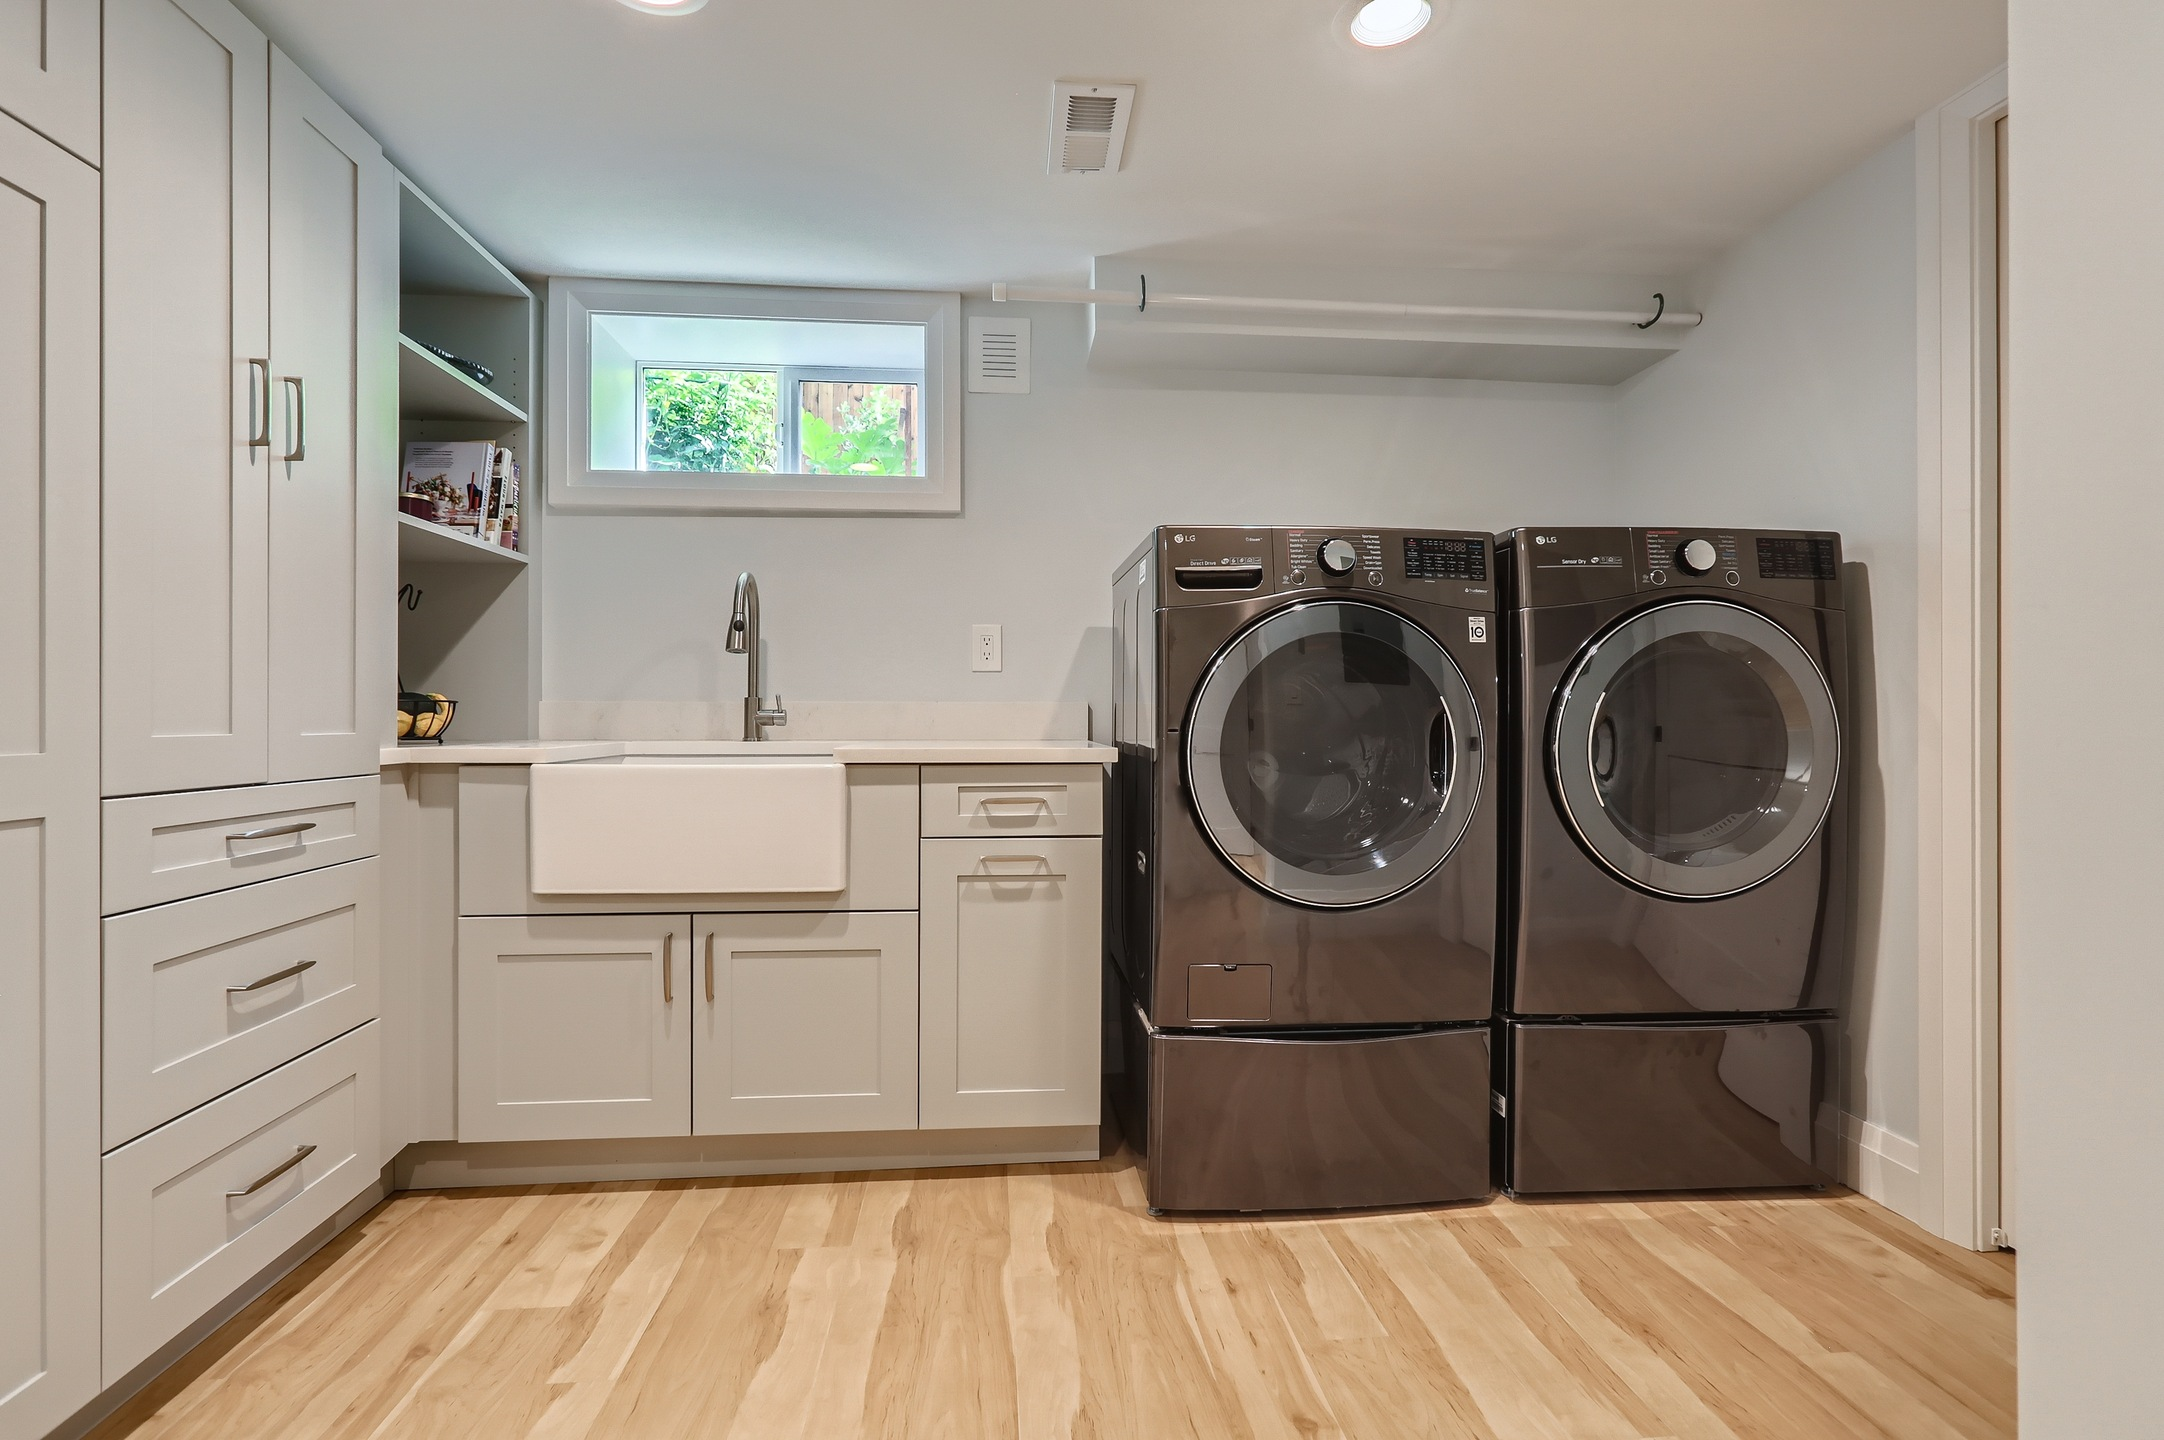 Washer and Dryer Solutions for Apartments Without Hookups - Survey